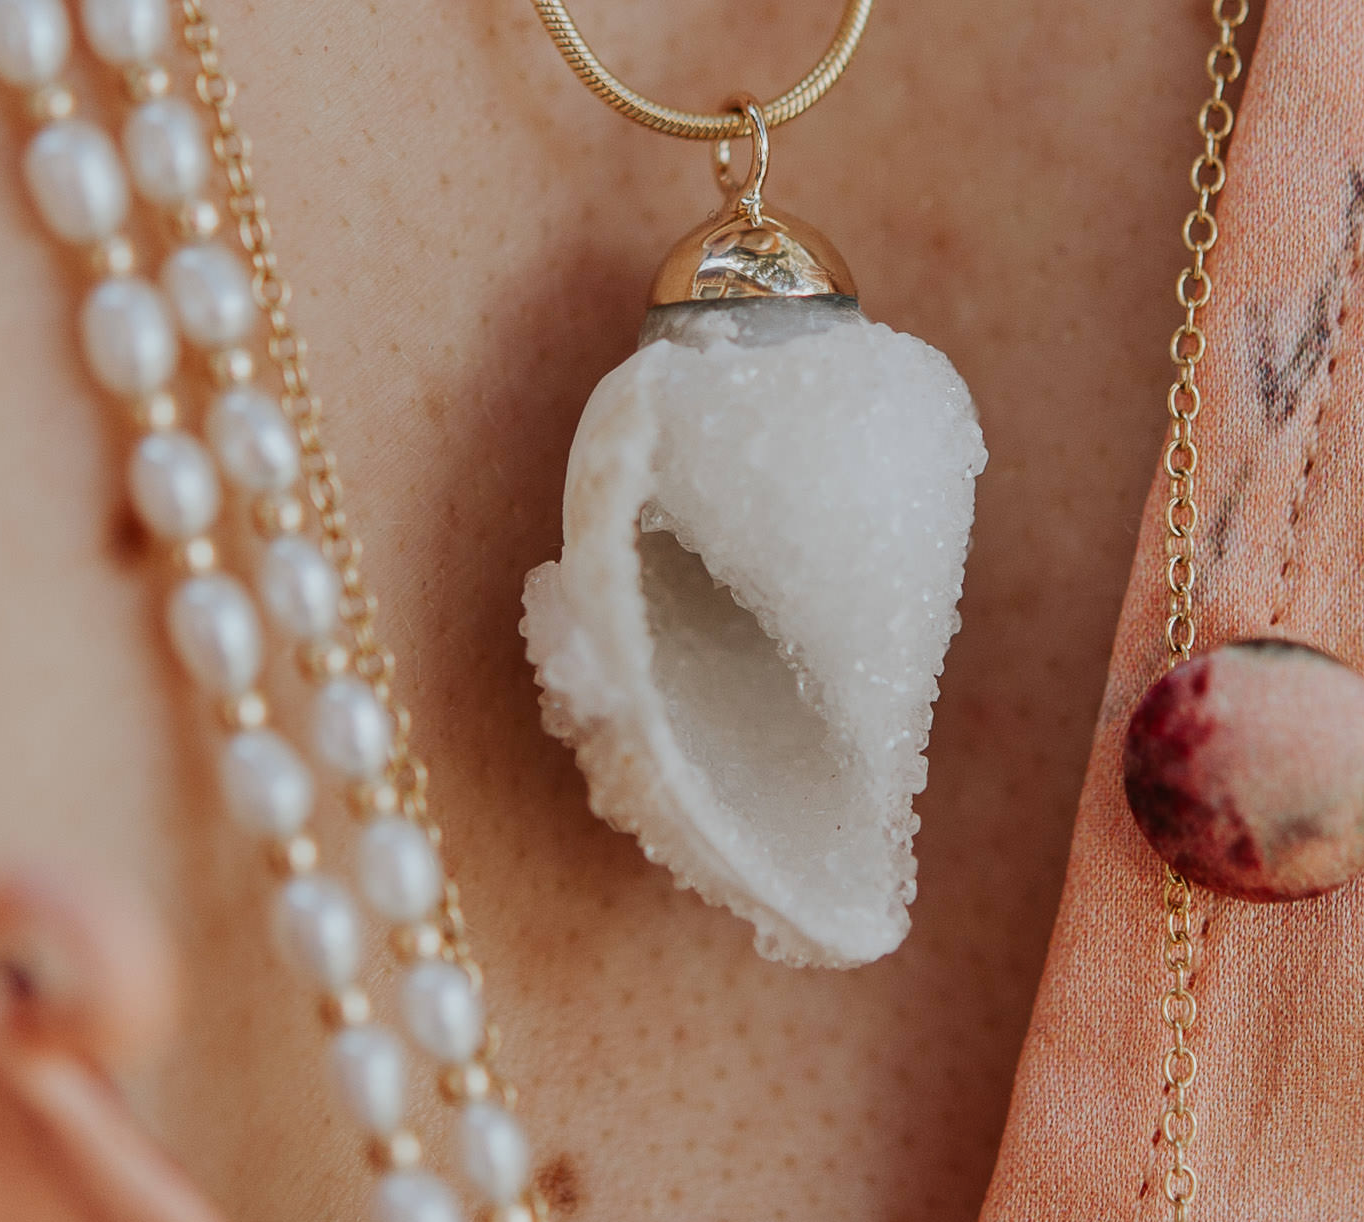 CRYSTAL SHELL AMULET GIFT WITH PURCHASE